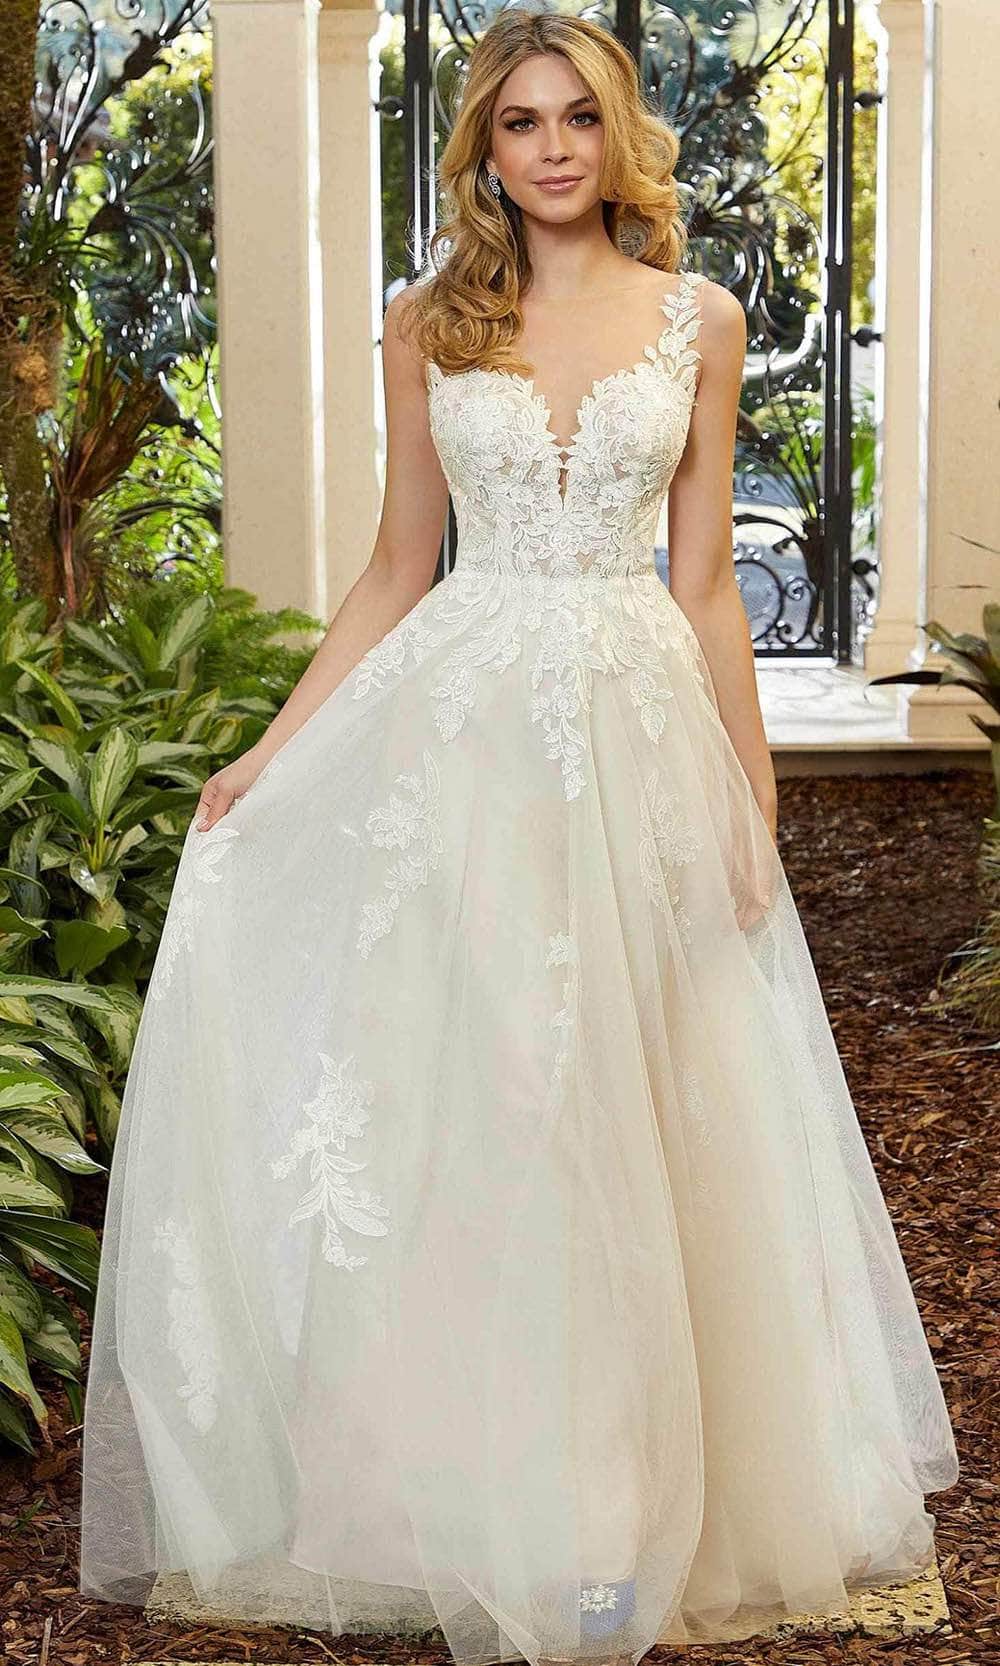 Ball Gown Wedding Dress LB2330, Size 12 in Stock, Bridal Gown, Ivory  Wedding Dress, Sleeveless Wedding Dress -  Canada